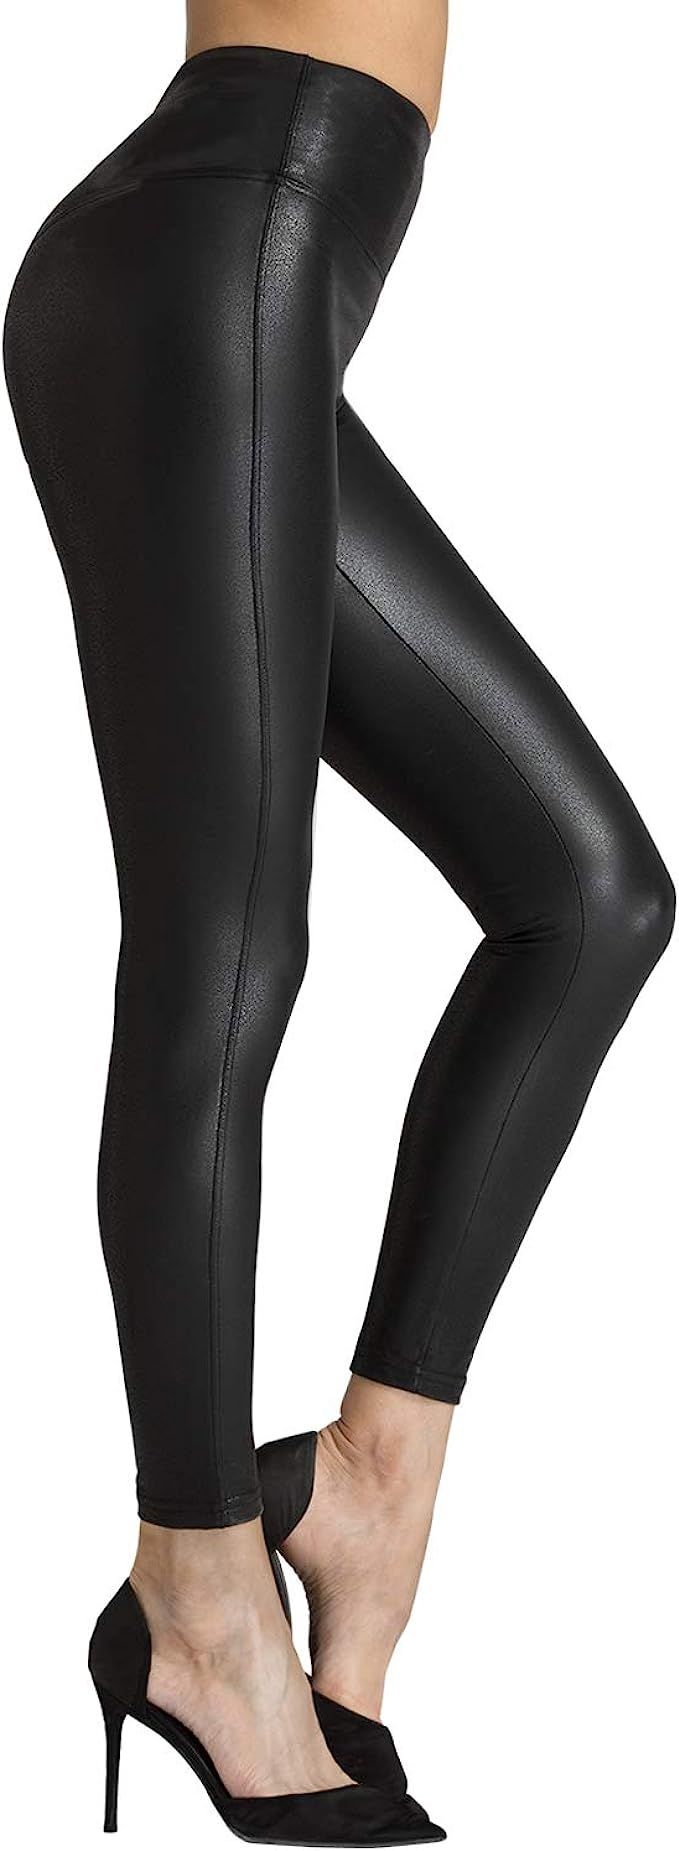 Booty GAL Faux Leather Leggings for Women High Waist Pants Black Elastic Tights (Sparkly Black, M... | Amazon (US)